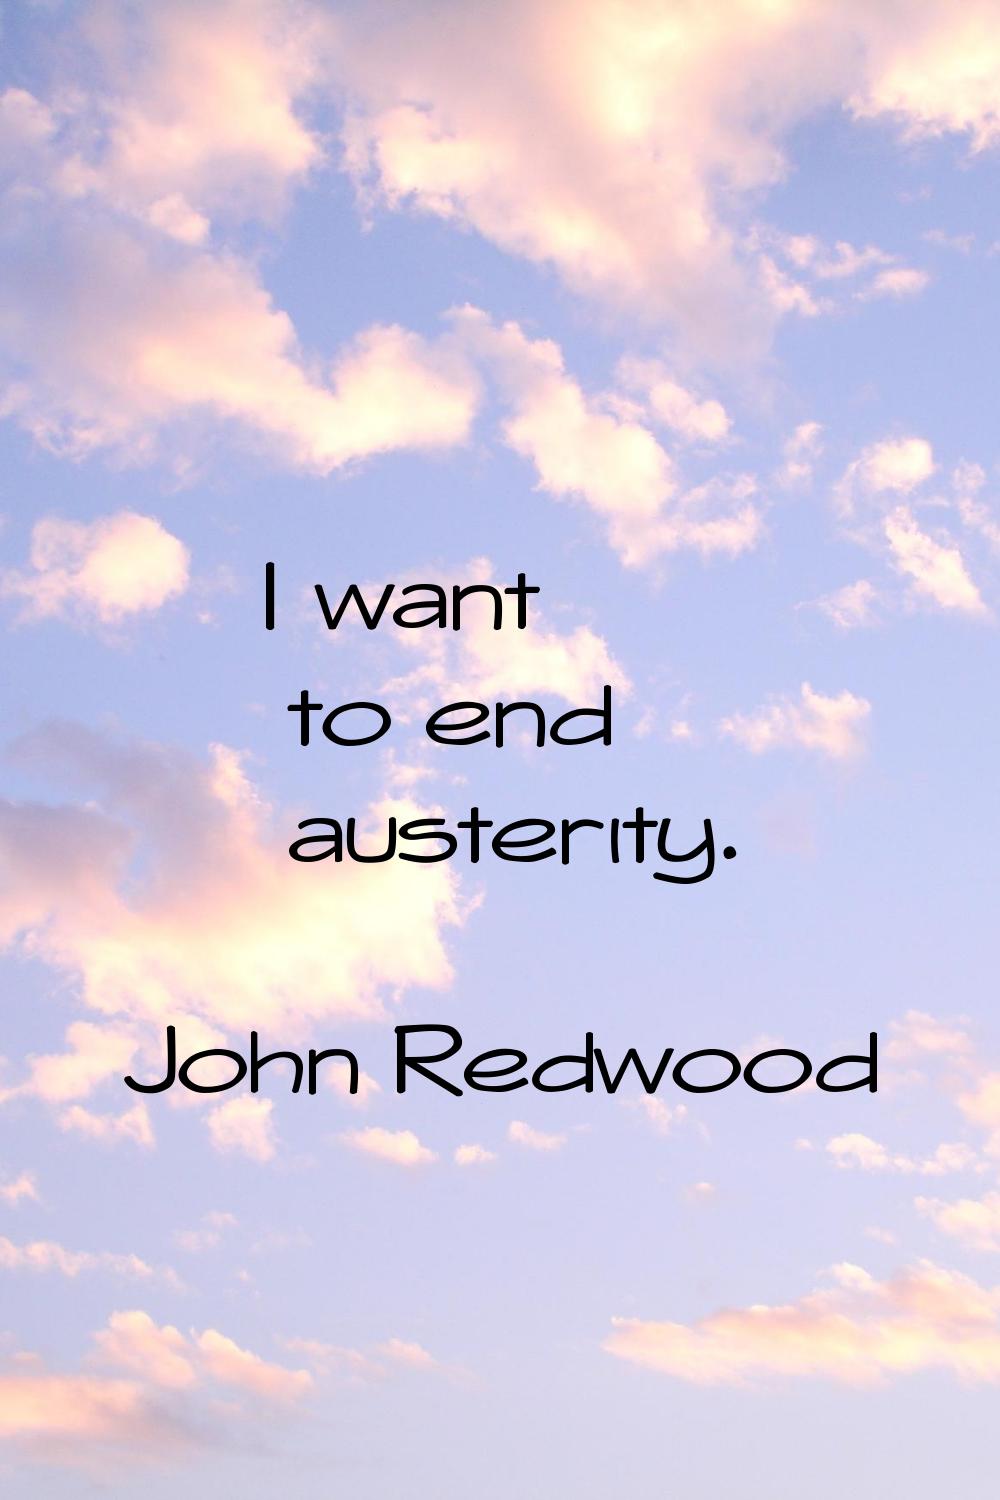 I want to end austerity.